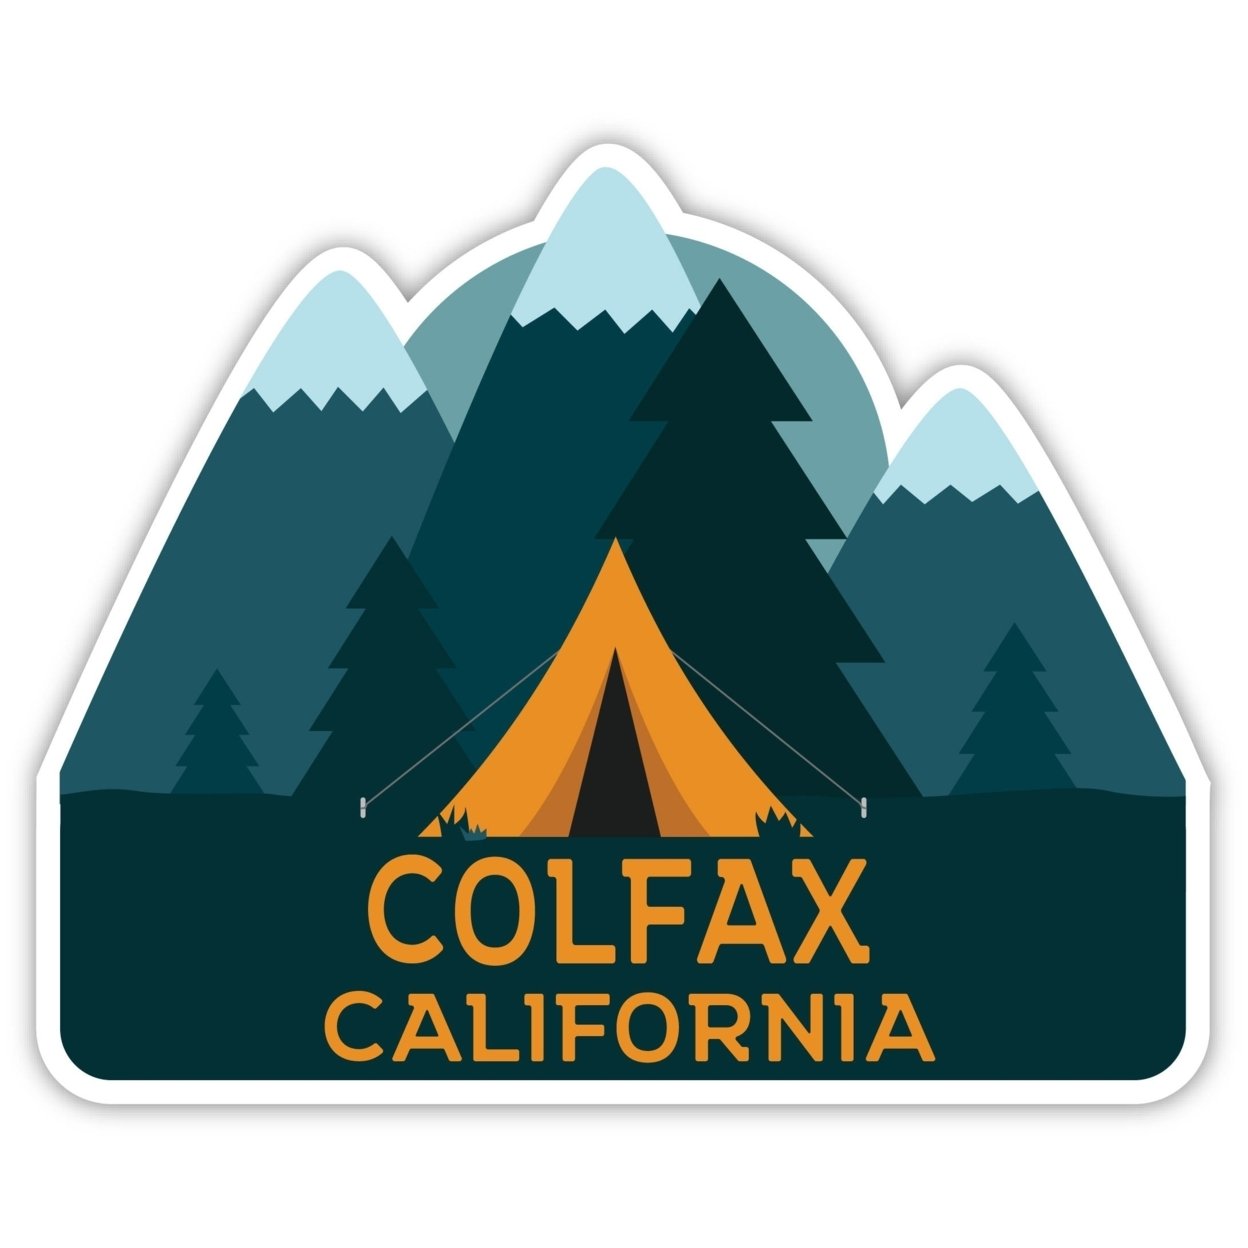 Colfax California Souvenir Decorative Stickers (Choose Theme And Size) - 4-Pack, 2-Inch, Tent